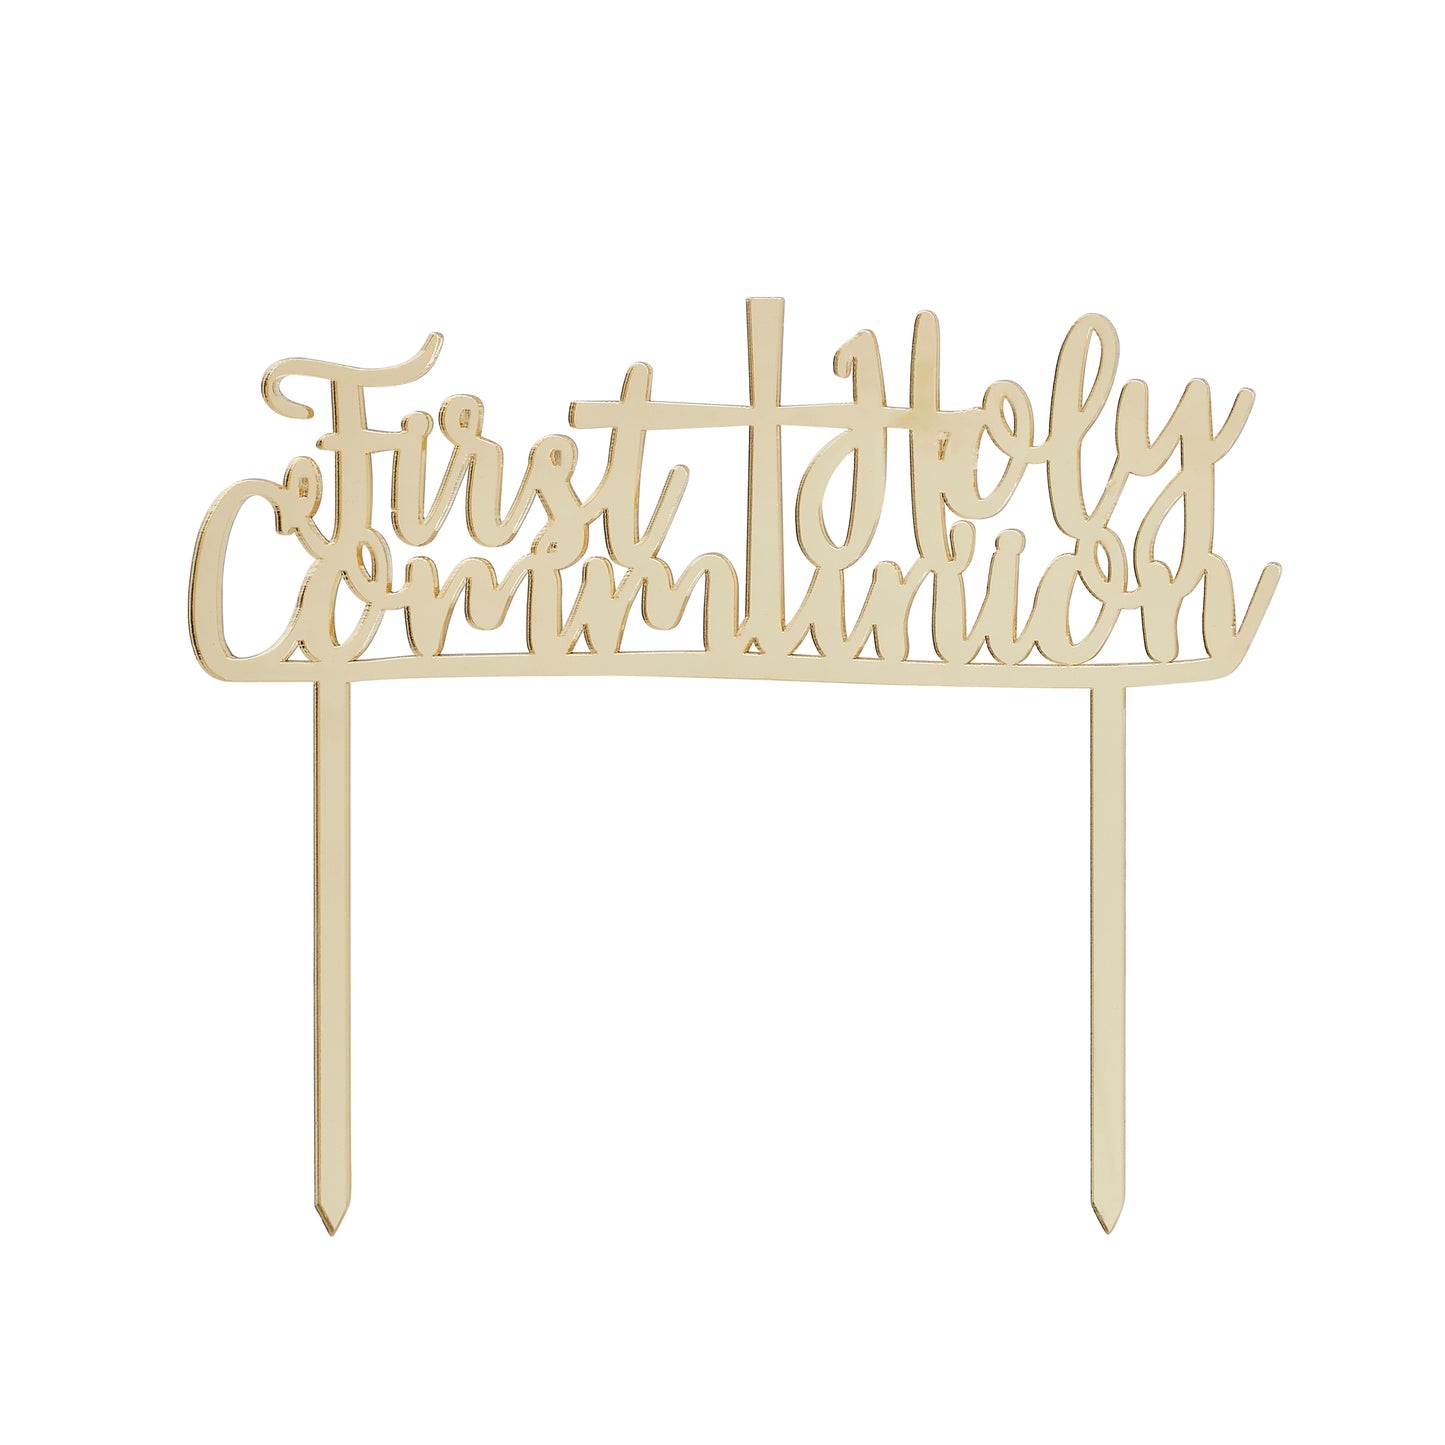 Gold Acrylic 'First Holy Communion' Cake Topper